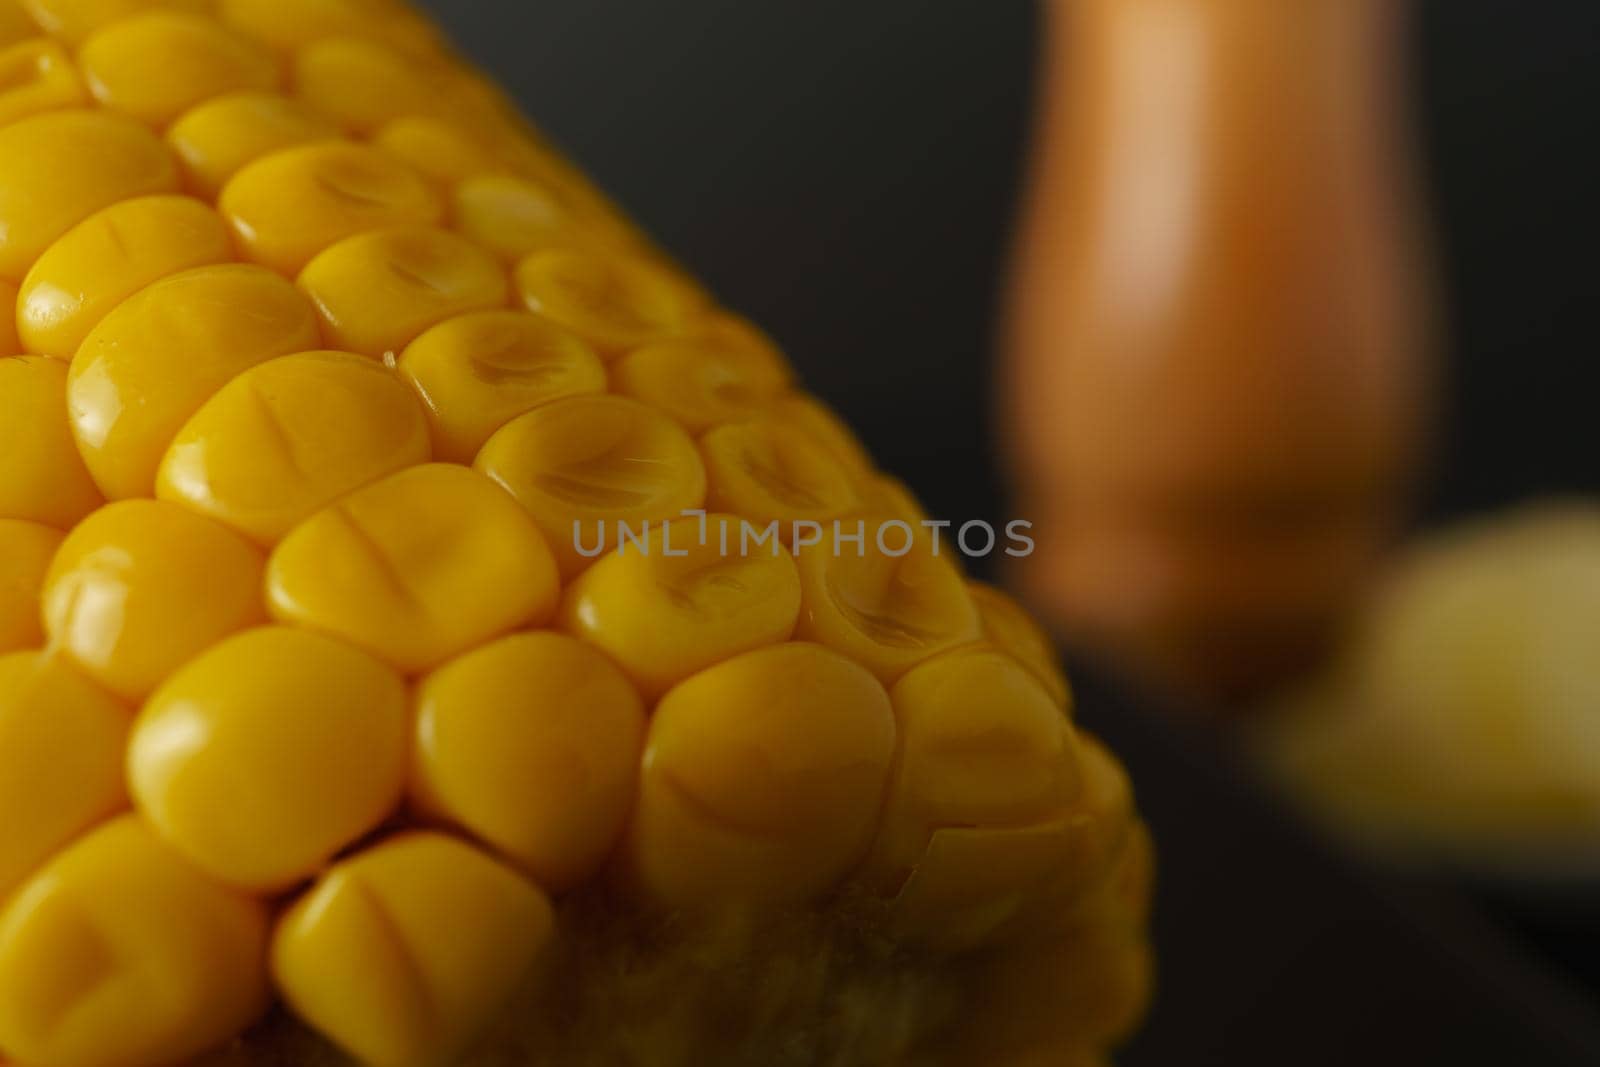 close-up macro shot of a fresh ear of corn with an out-of-focus pepper pot in the background